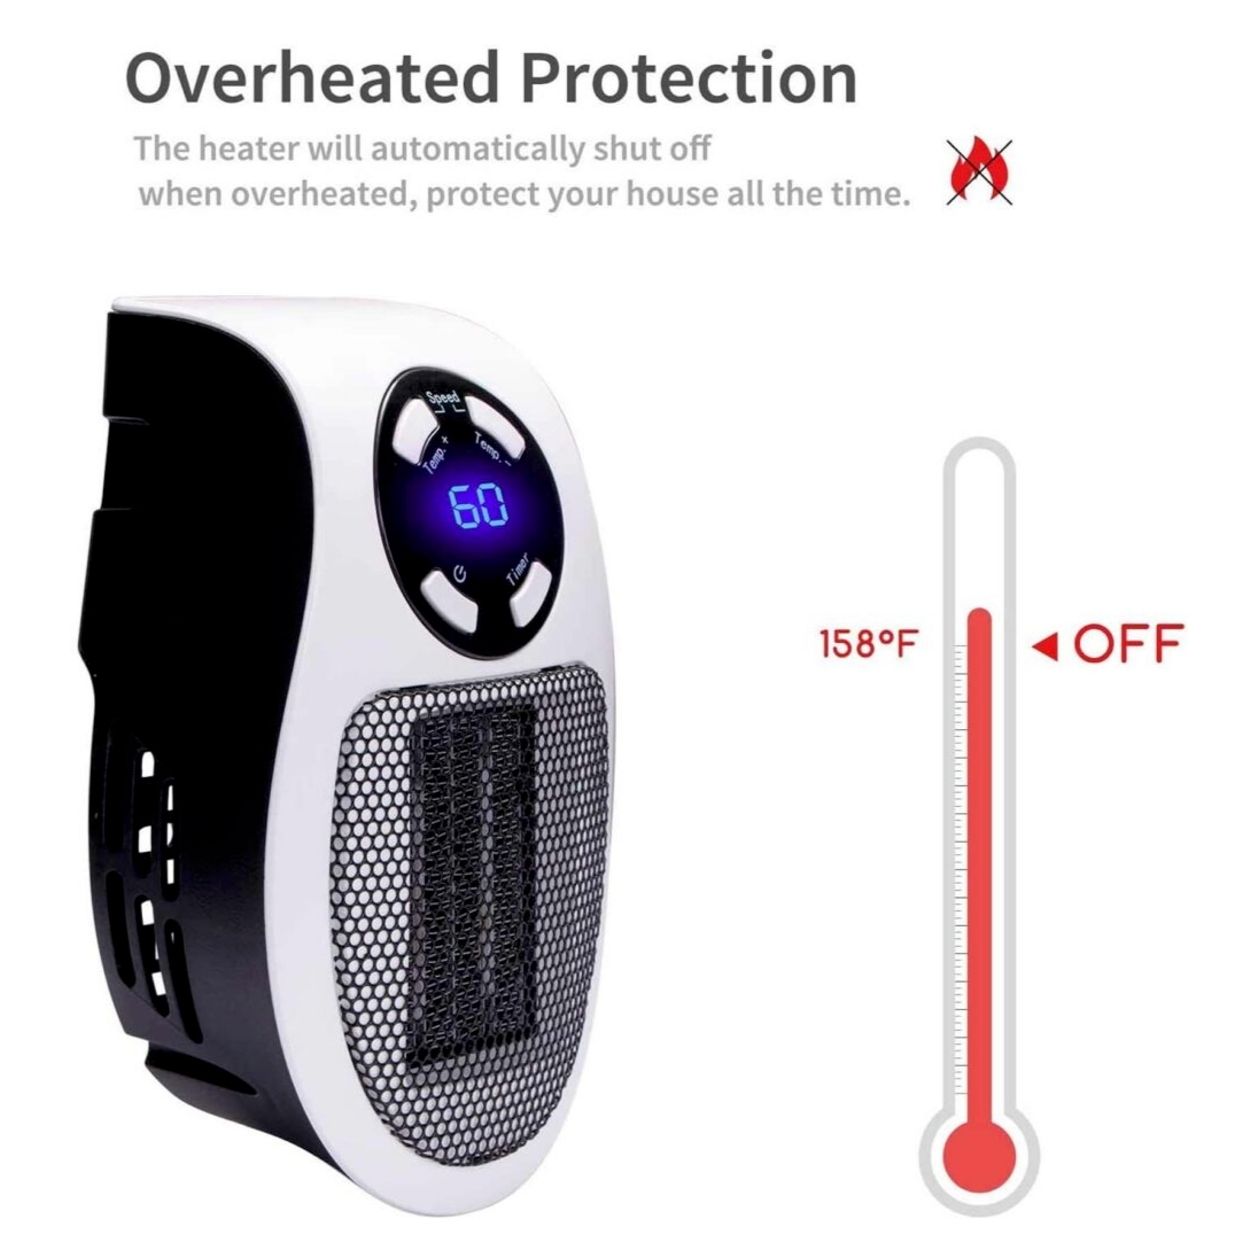 Overheated Protection